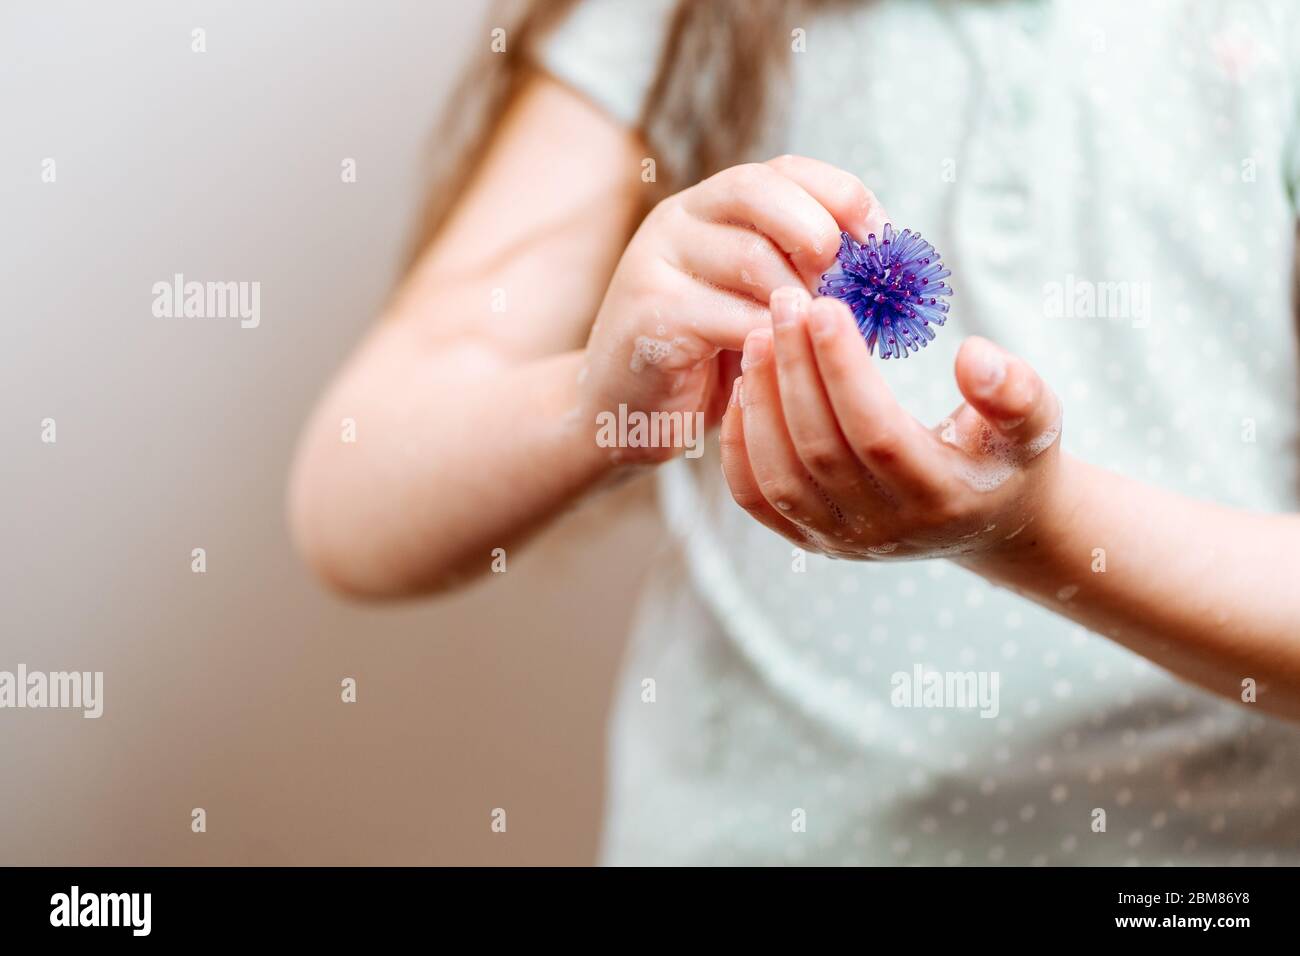 Girl with hands in soap holds an abstract model of coronavirus. Protect yourself wash your hands more often. Stock Photo